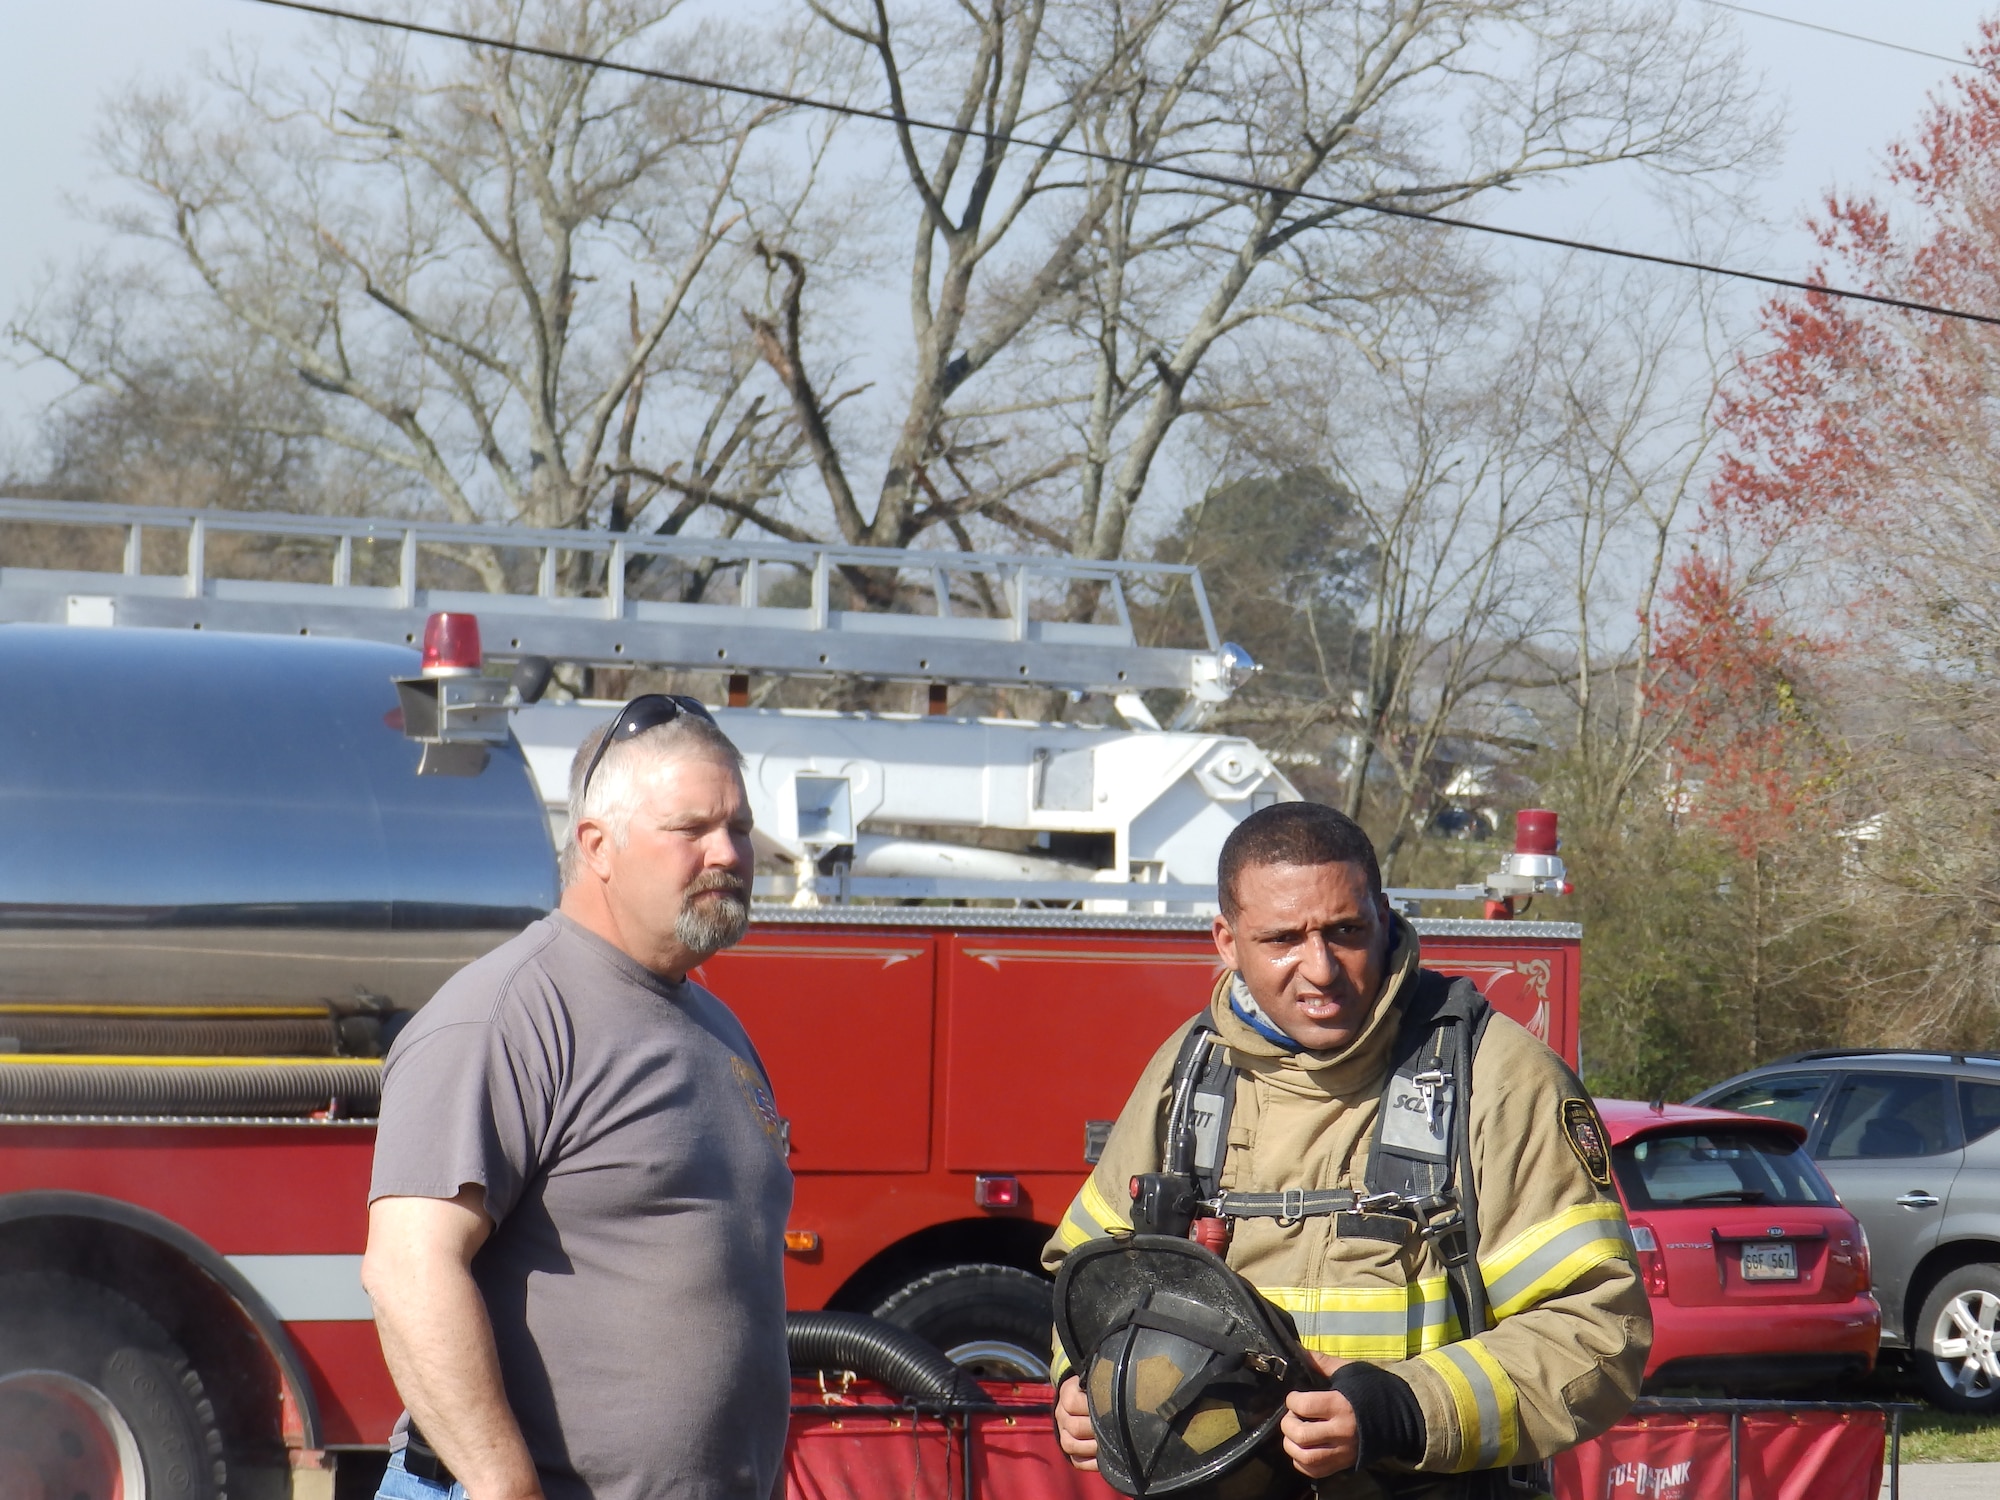 From left, Hillsboro Volunteer Fire Department Chief Jerry Brown and AEDC Fire Department Assistant Chief of Operations and Hillsboro Volunteer Fire Department team member George DeShields, conduct an after-action brief upon completion of a live fire exercise during the recent 2nd Annual Multi-County Live Burn Weekend at the Hillsboro Park. (Photo provided)